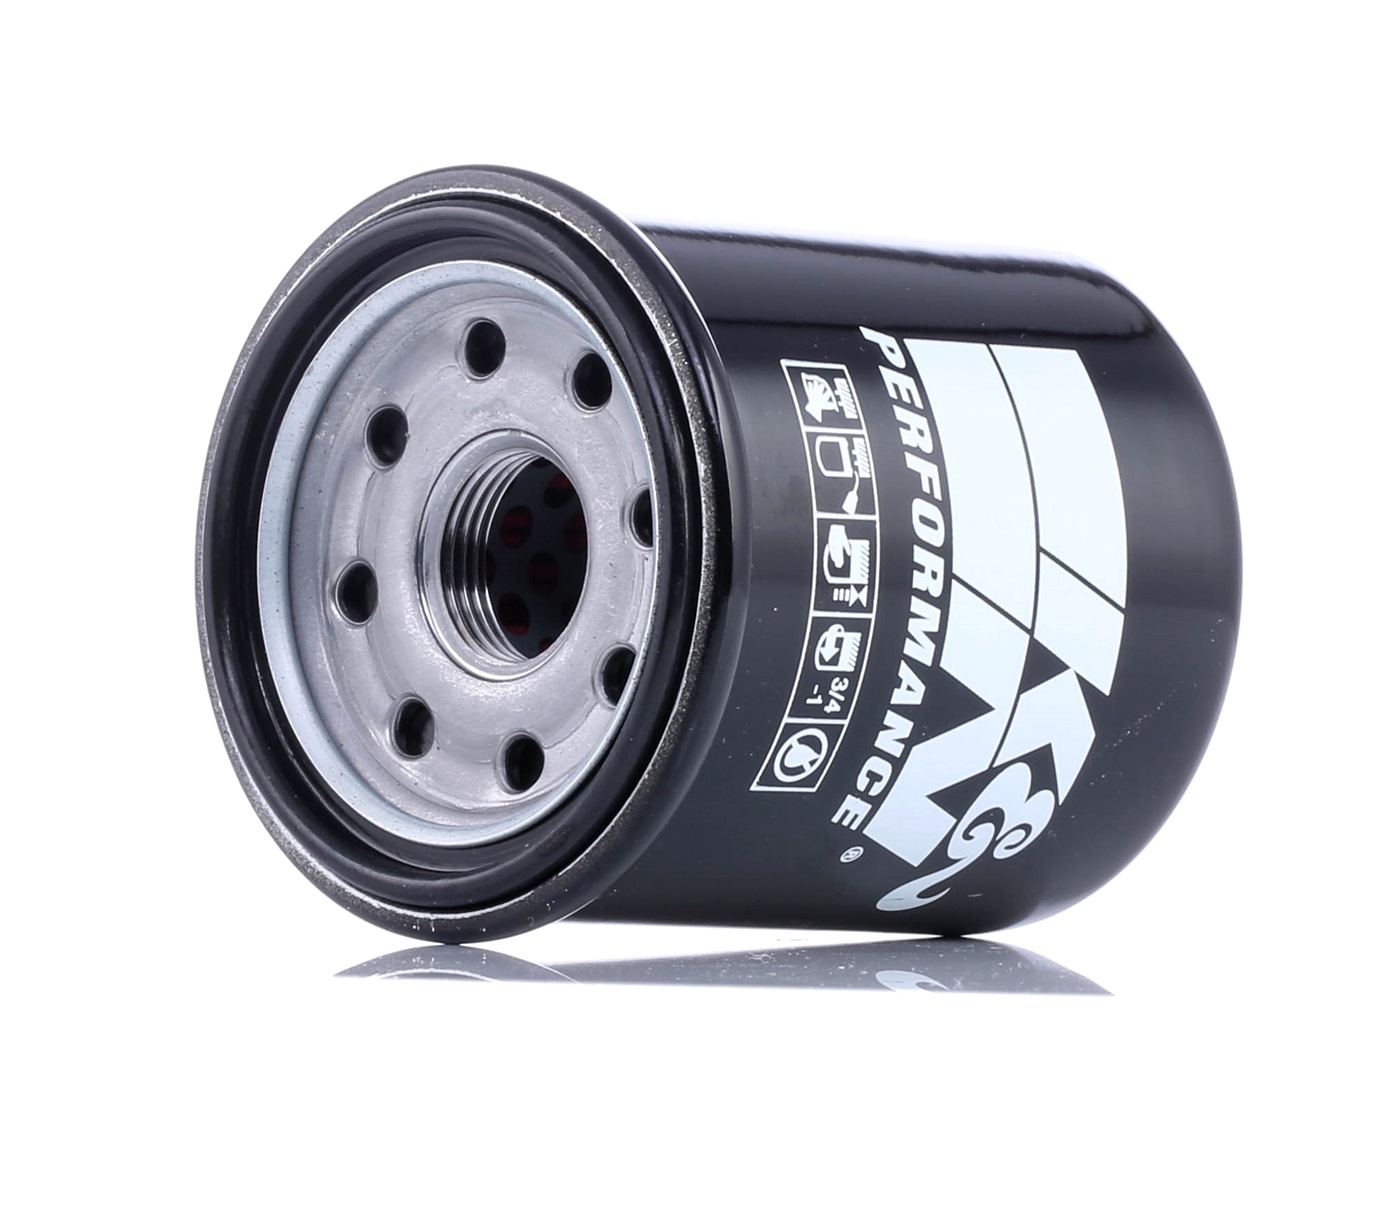 Filtre à huile K&N Filters KN-303 XJ Moto Mobylette Maxi scooter